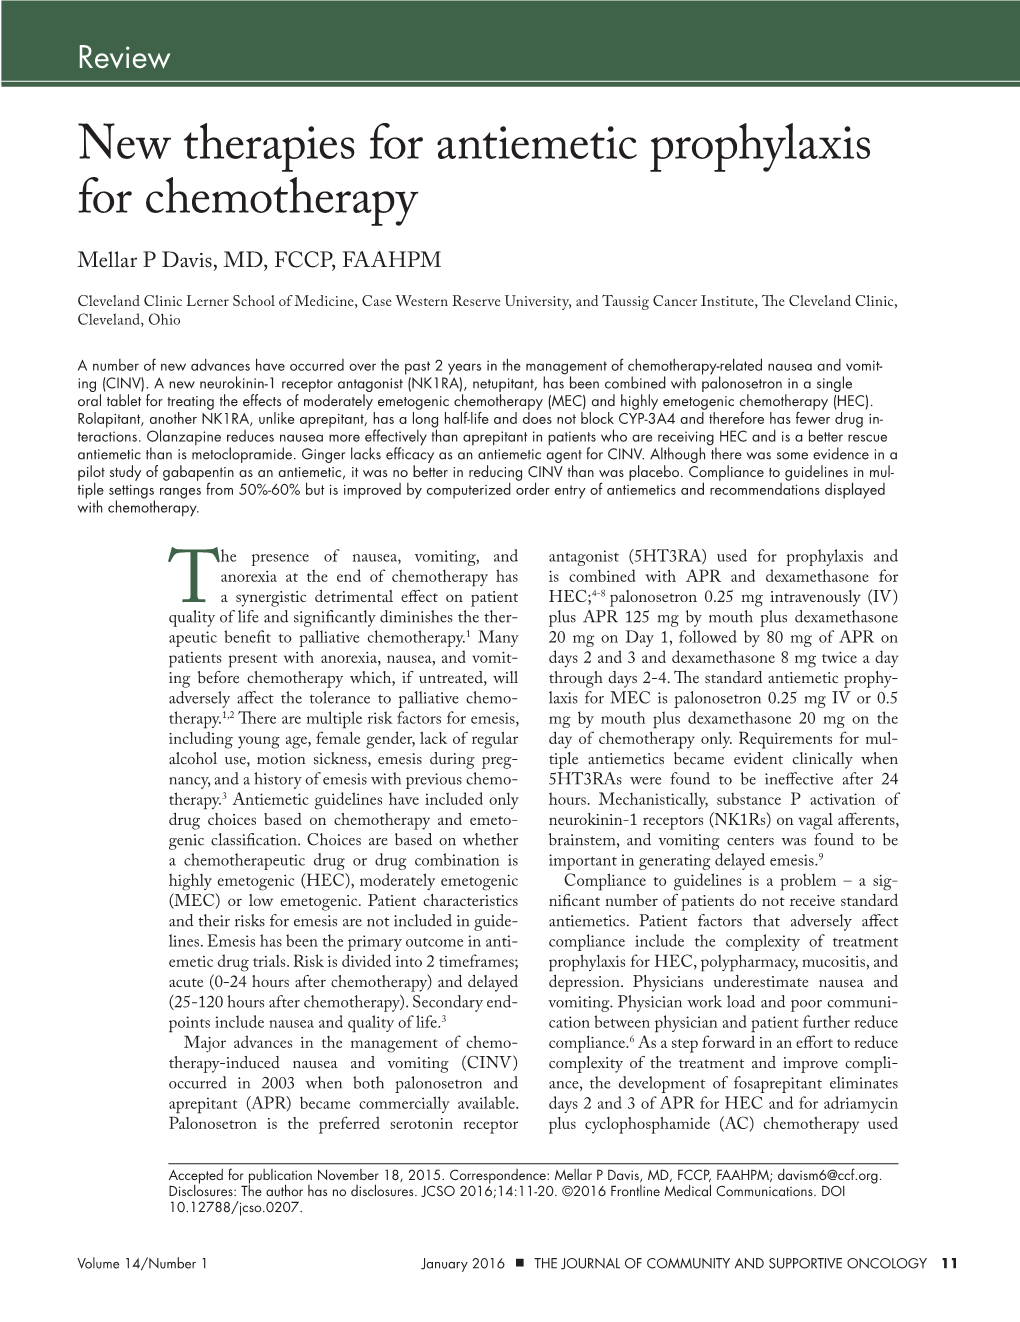 New Therapies for Antiemetic Prophylaxis for Chemotherapy